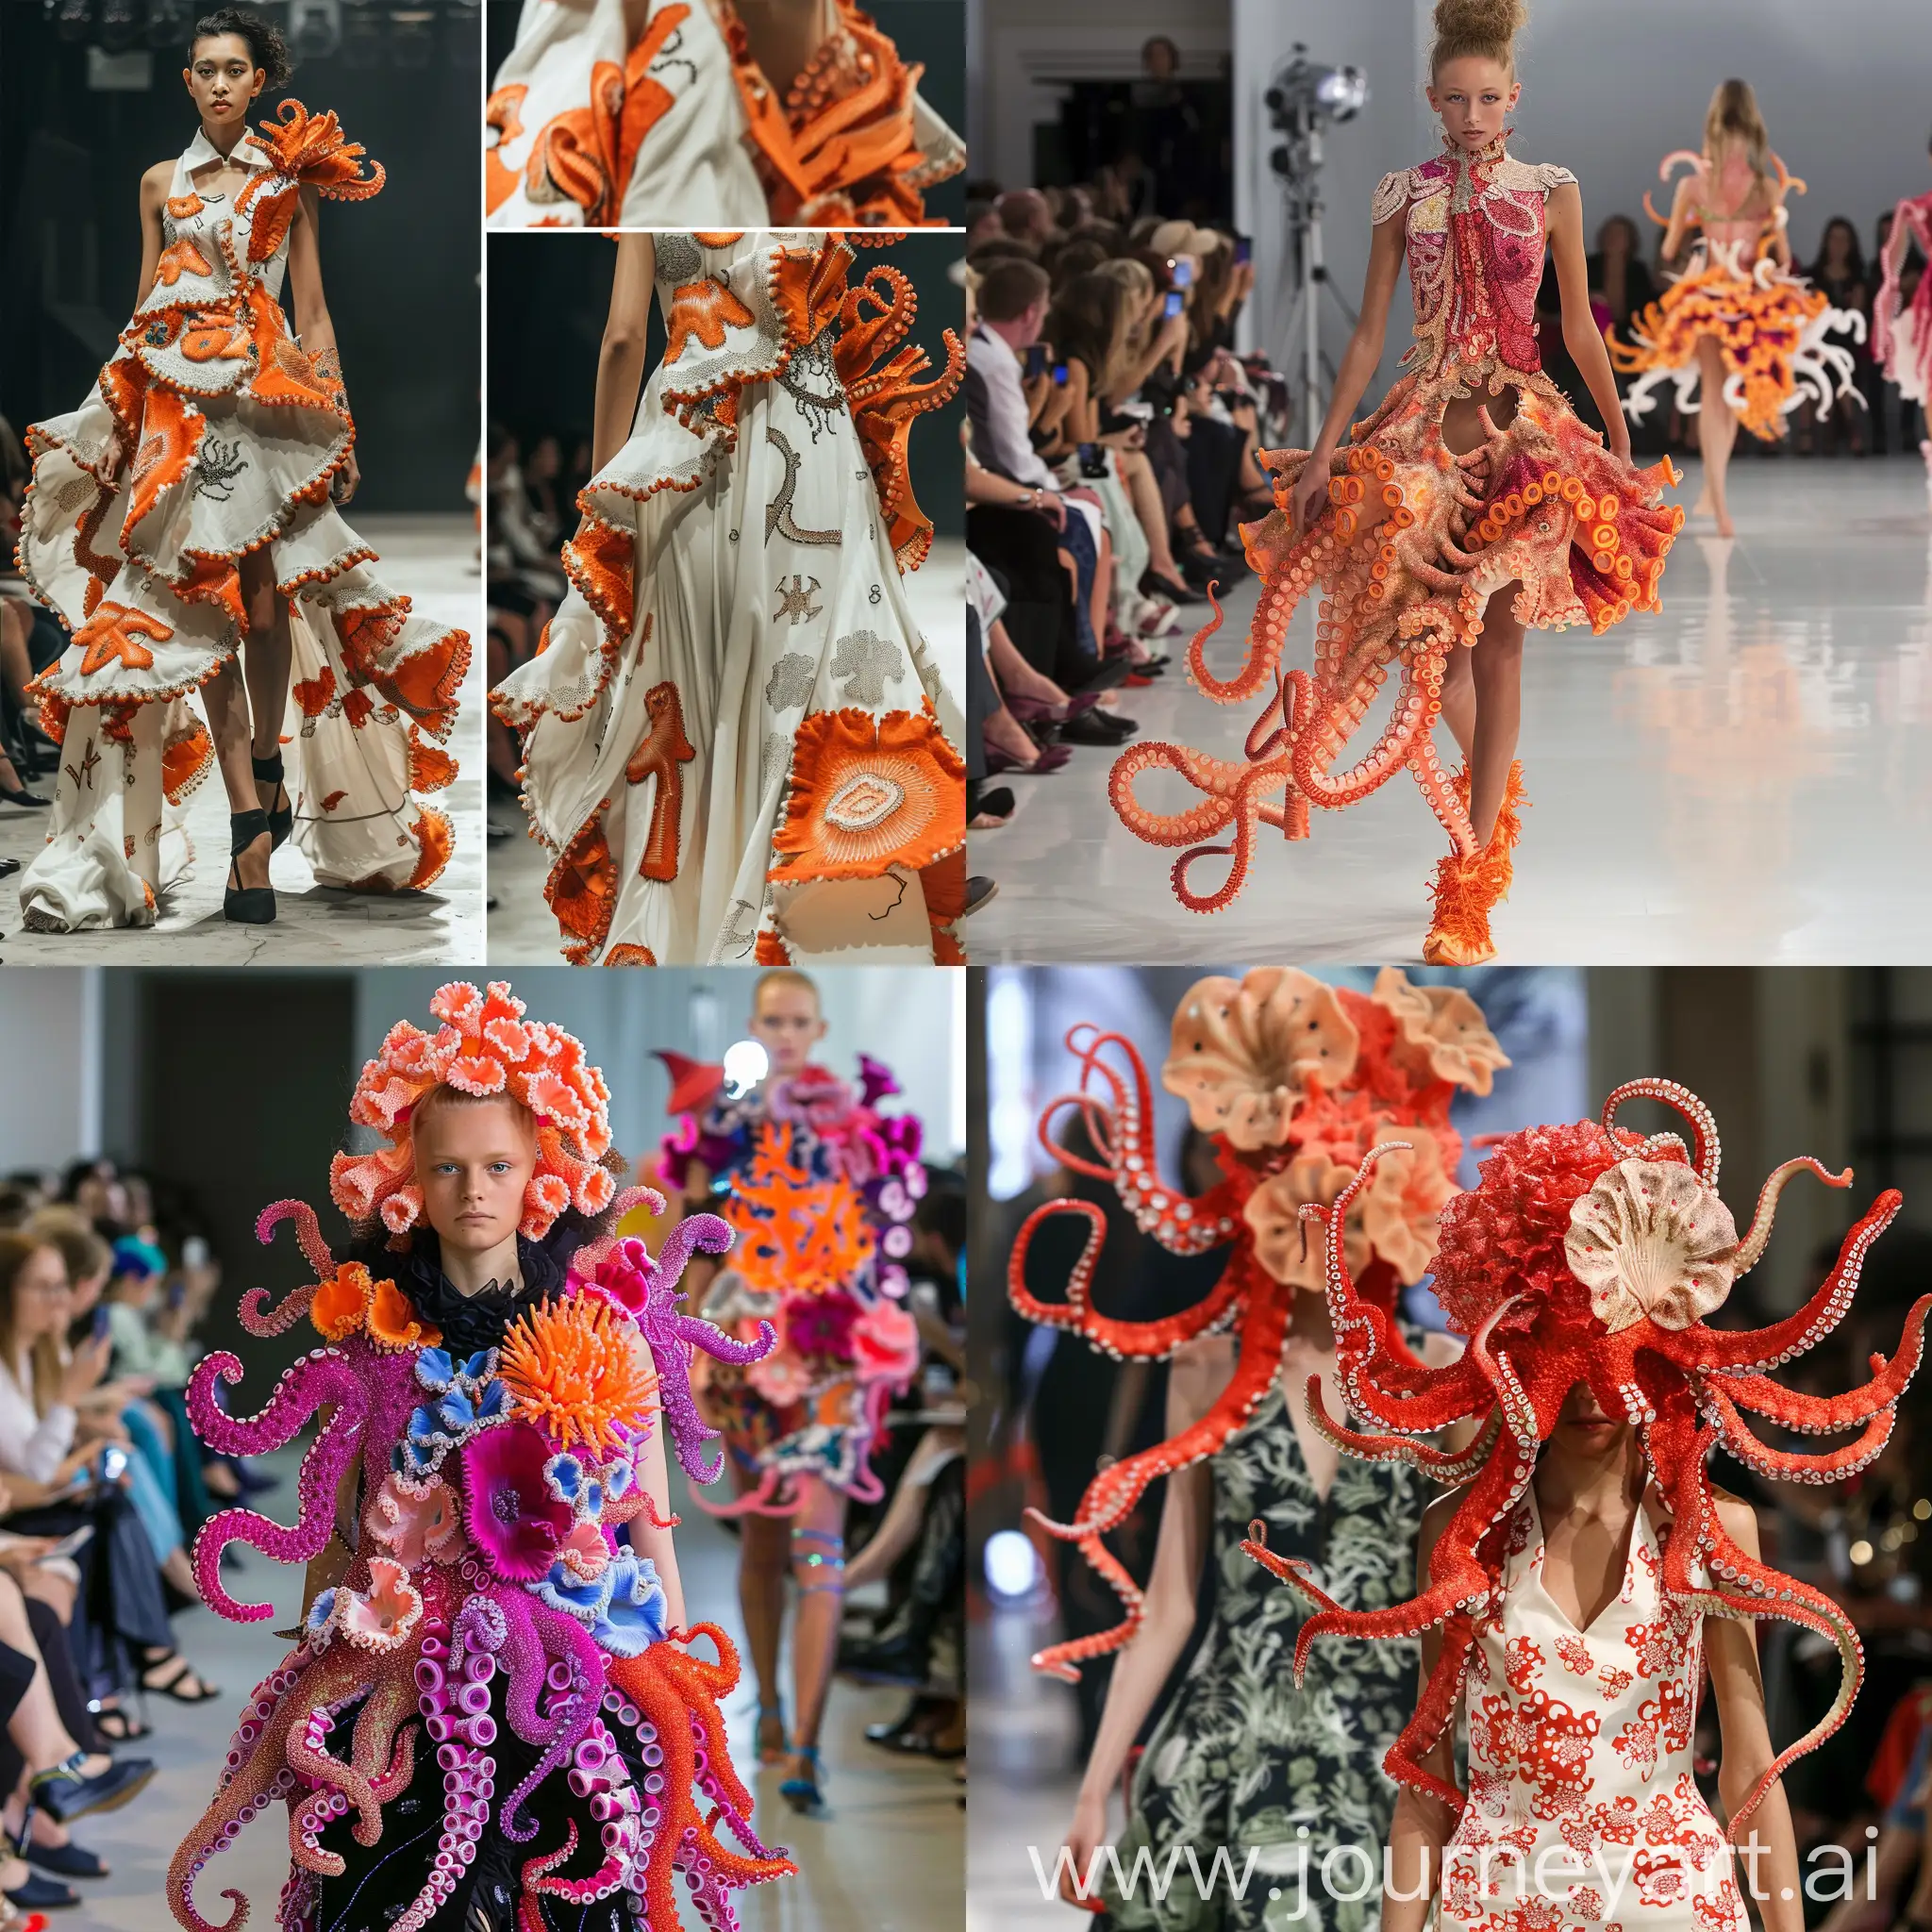 Fashion-Design-Inspired-by-Corals-and-Octopuses-on-Runway